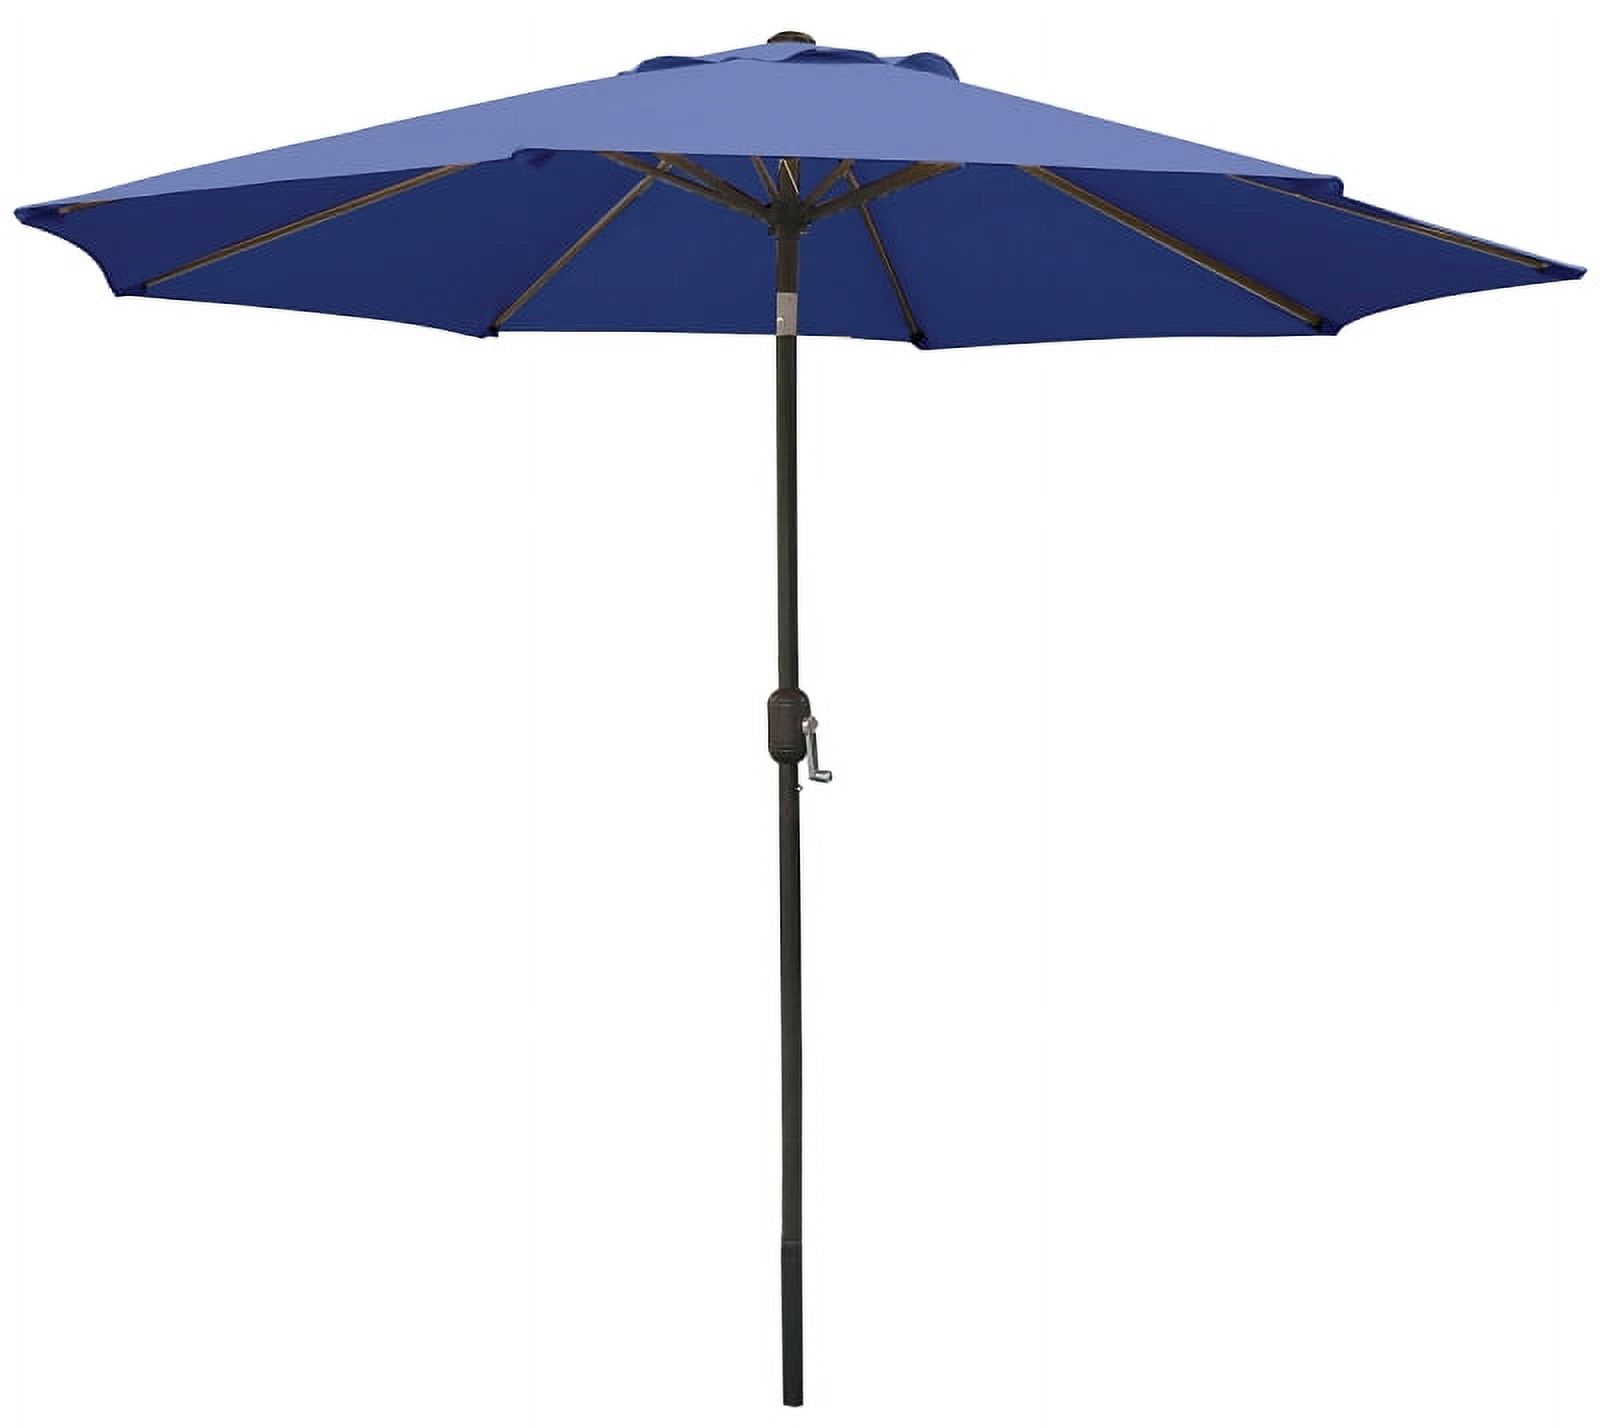 Seasonal Trends 60033 Crank Umbrella, 92.9 in H, 107.9 in W Canopy, 107.9 in L Canopy, Round Canopy, Steel Frame - image 1 of 1